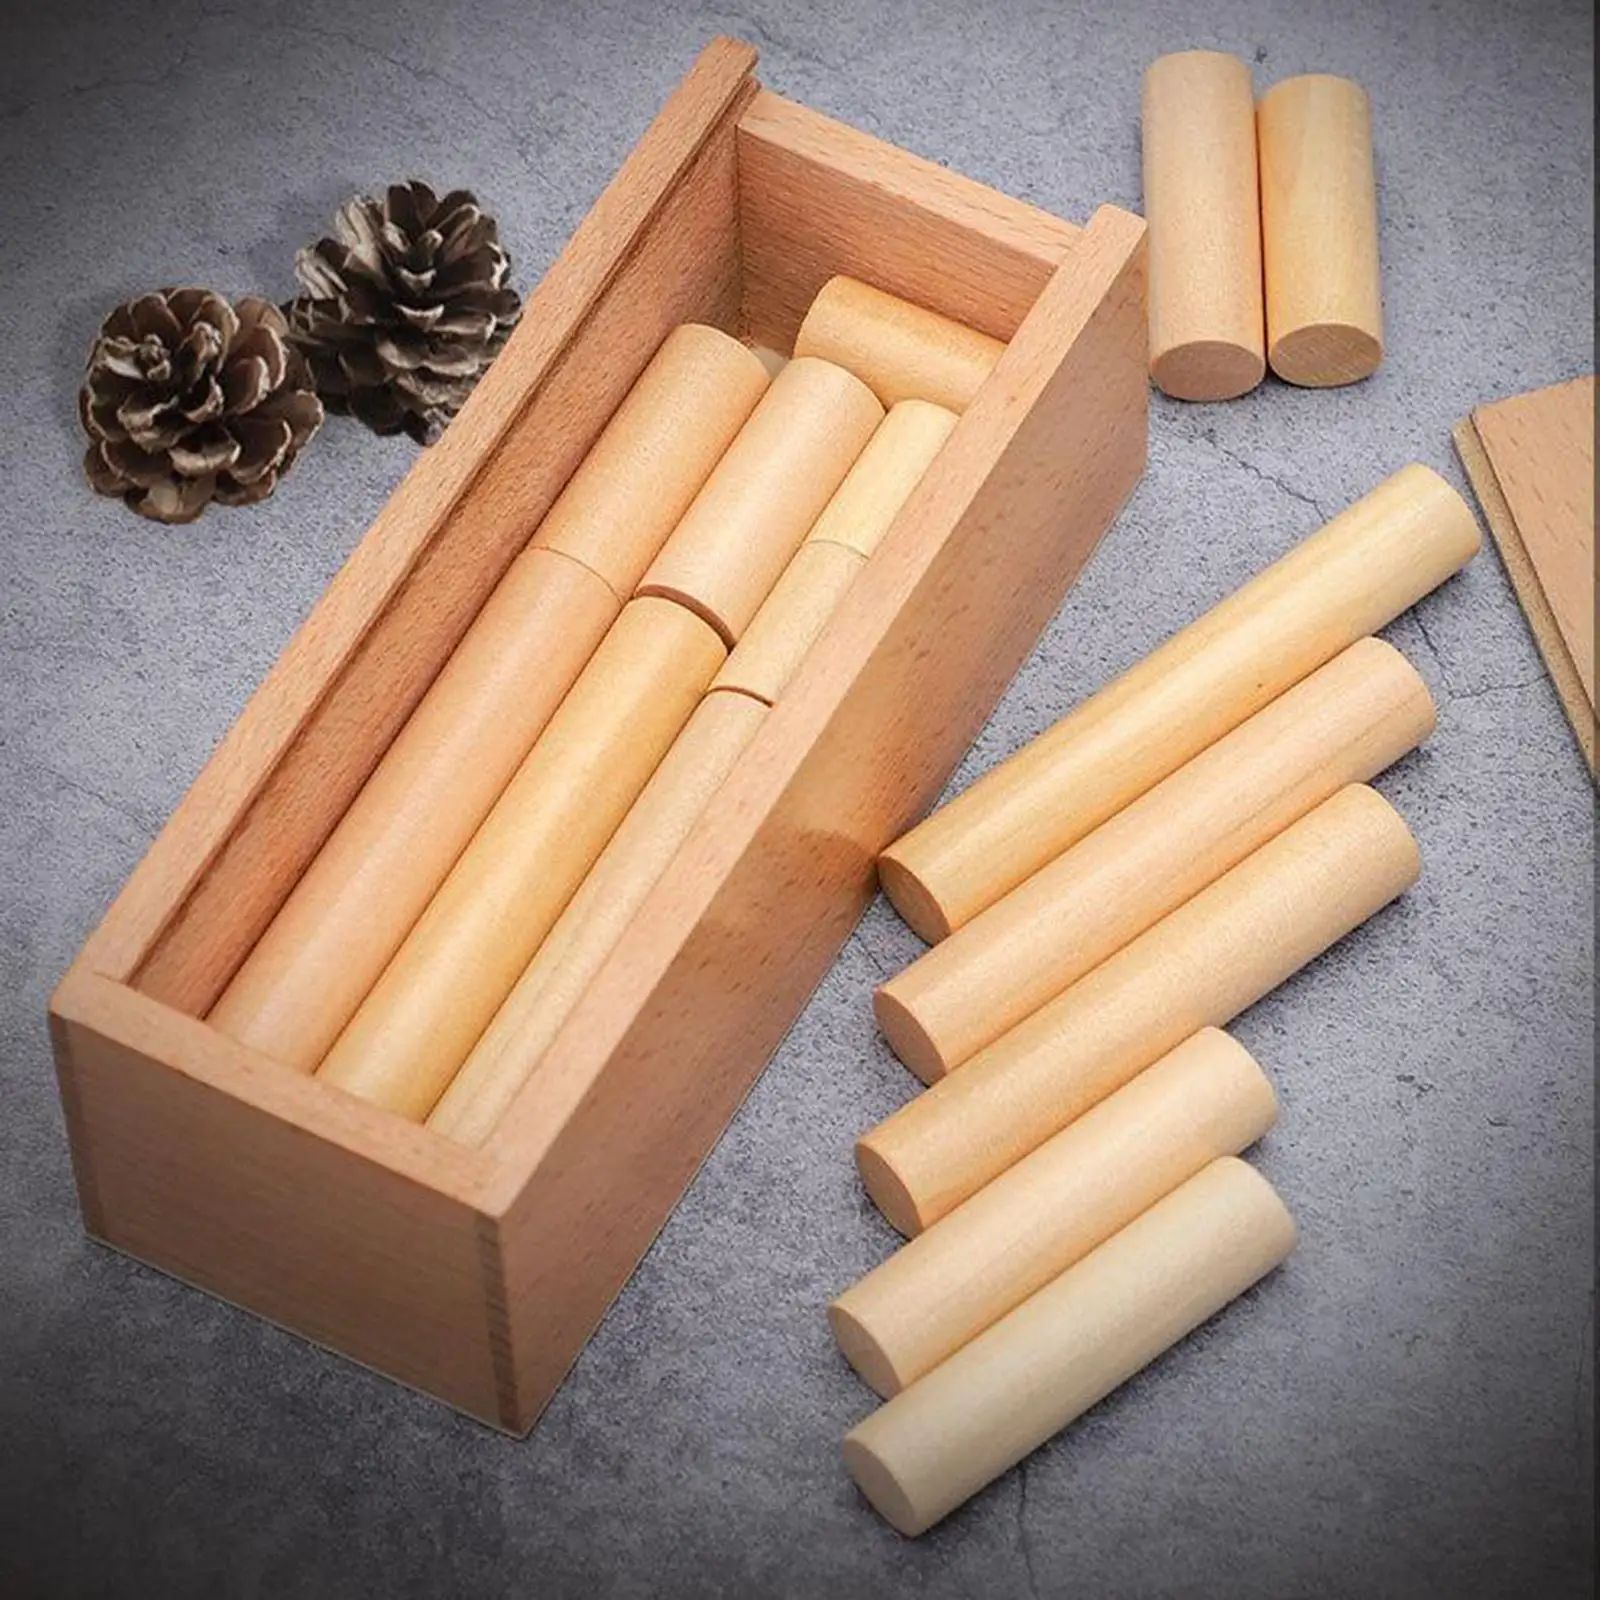 Wooden Cylinder Puzzle Toy Assembly & Disentanglement Puzzles Lock Puzzle Challenge Logic Game Intelligence Puzzles Game